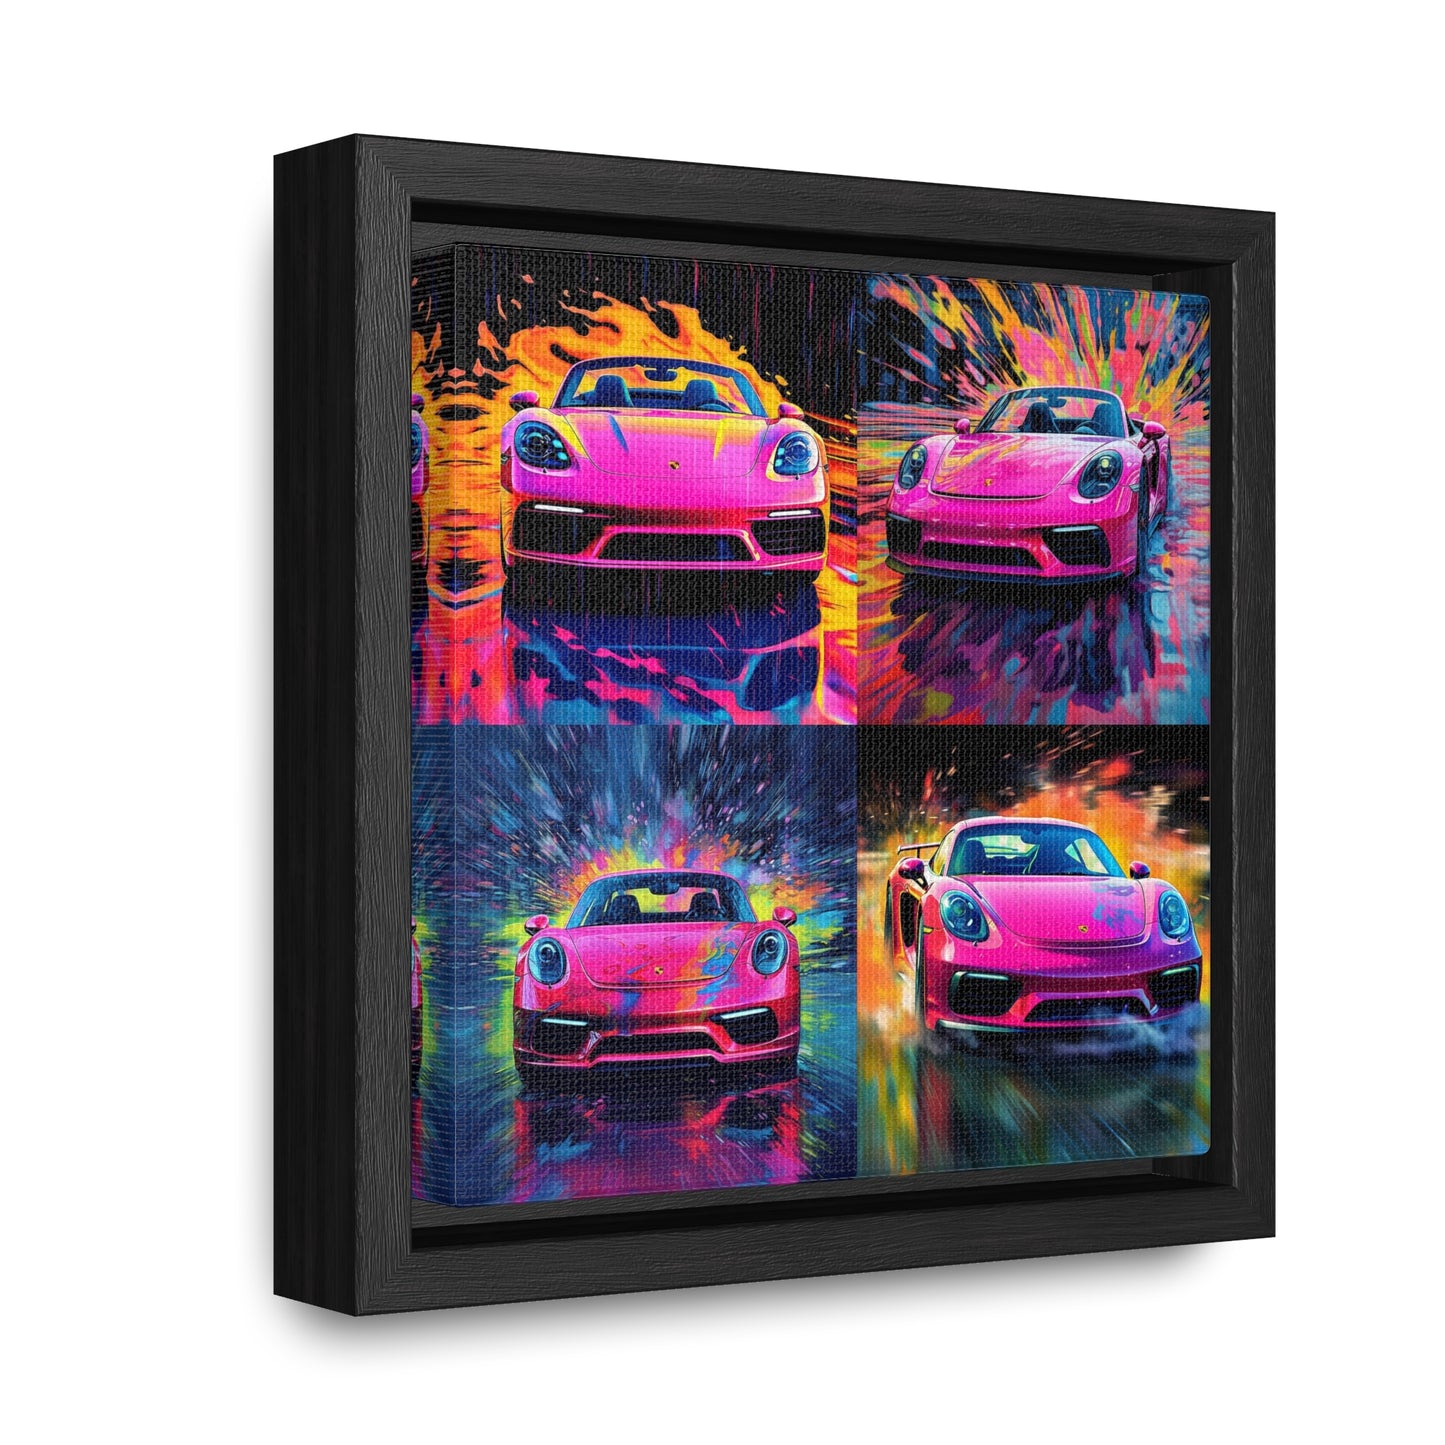 Gallery Canvas Wraps, Square Frame Pink Porsche water fusion 5